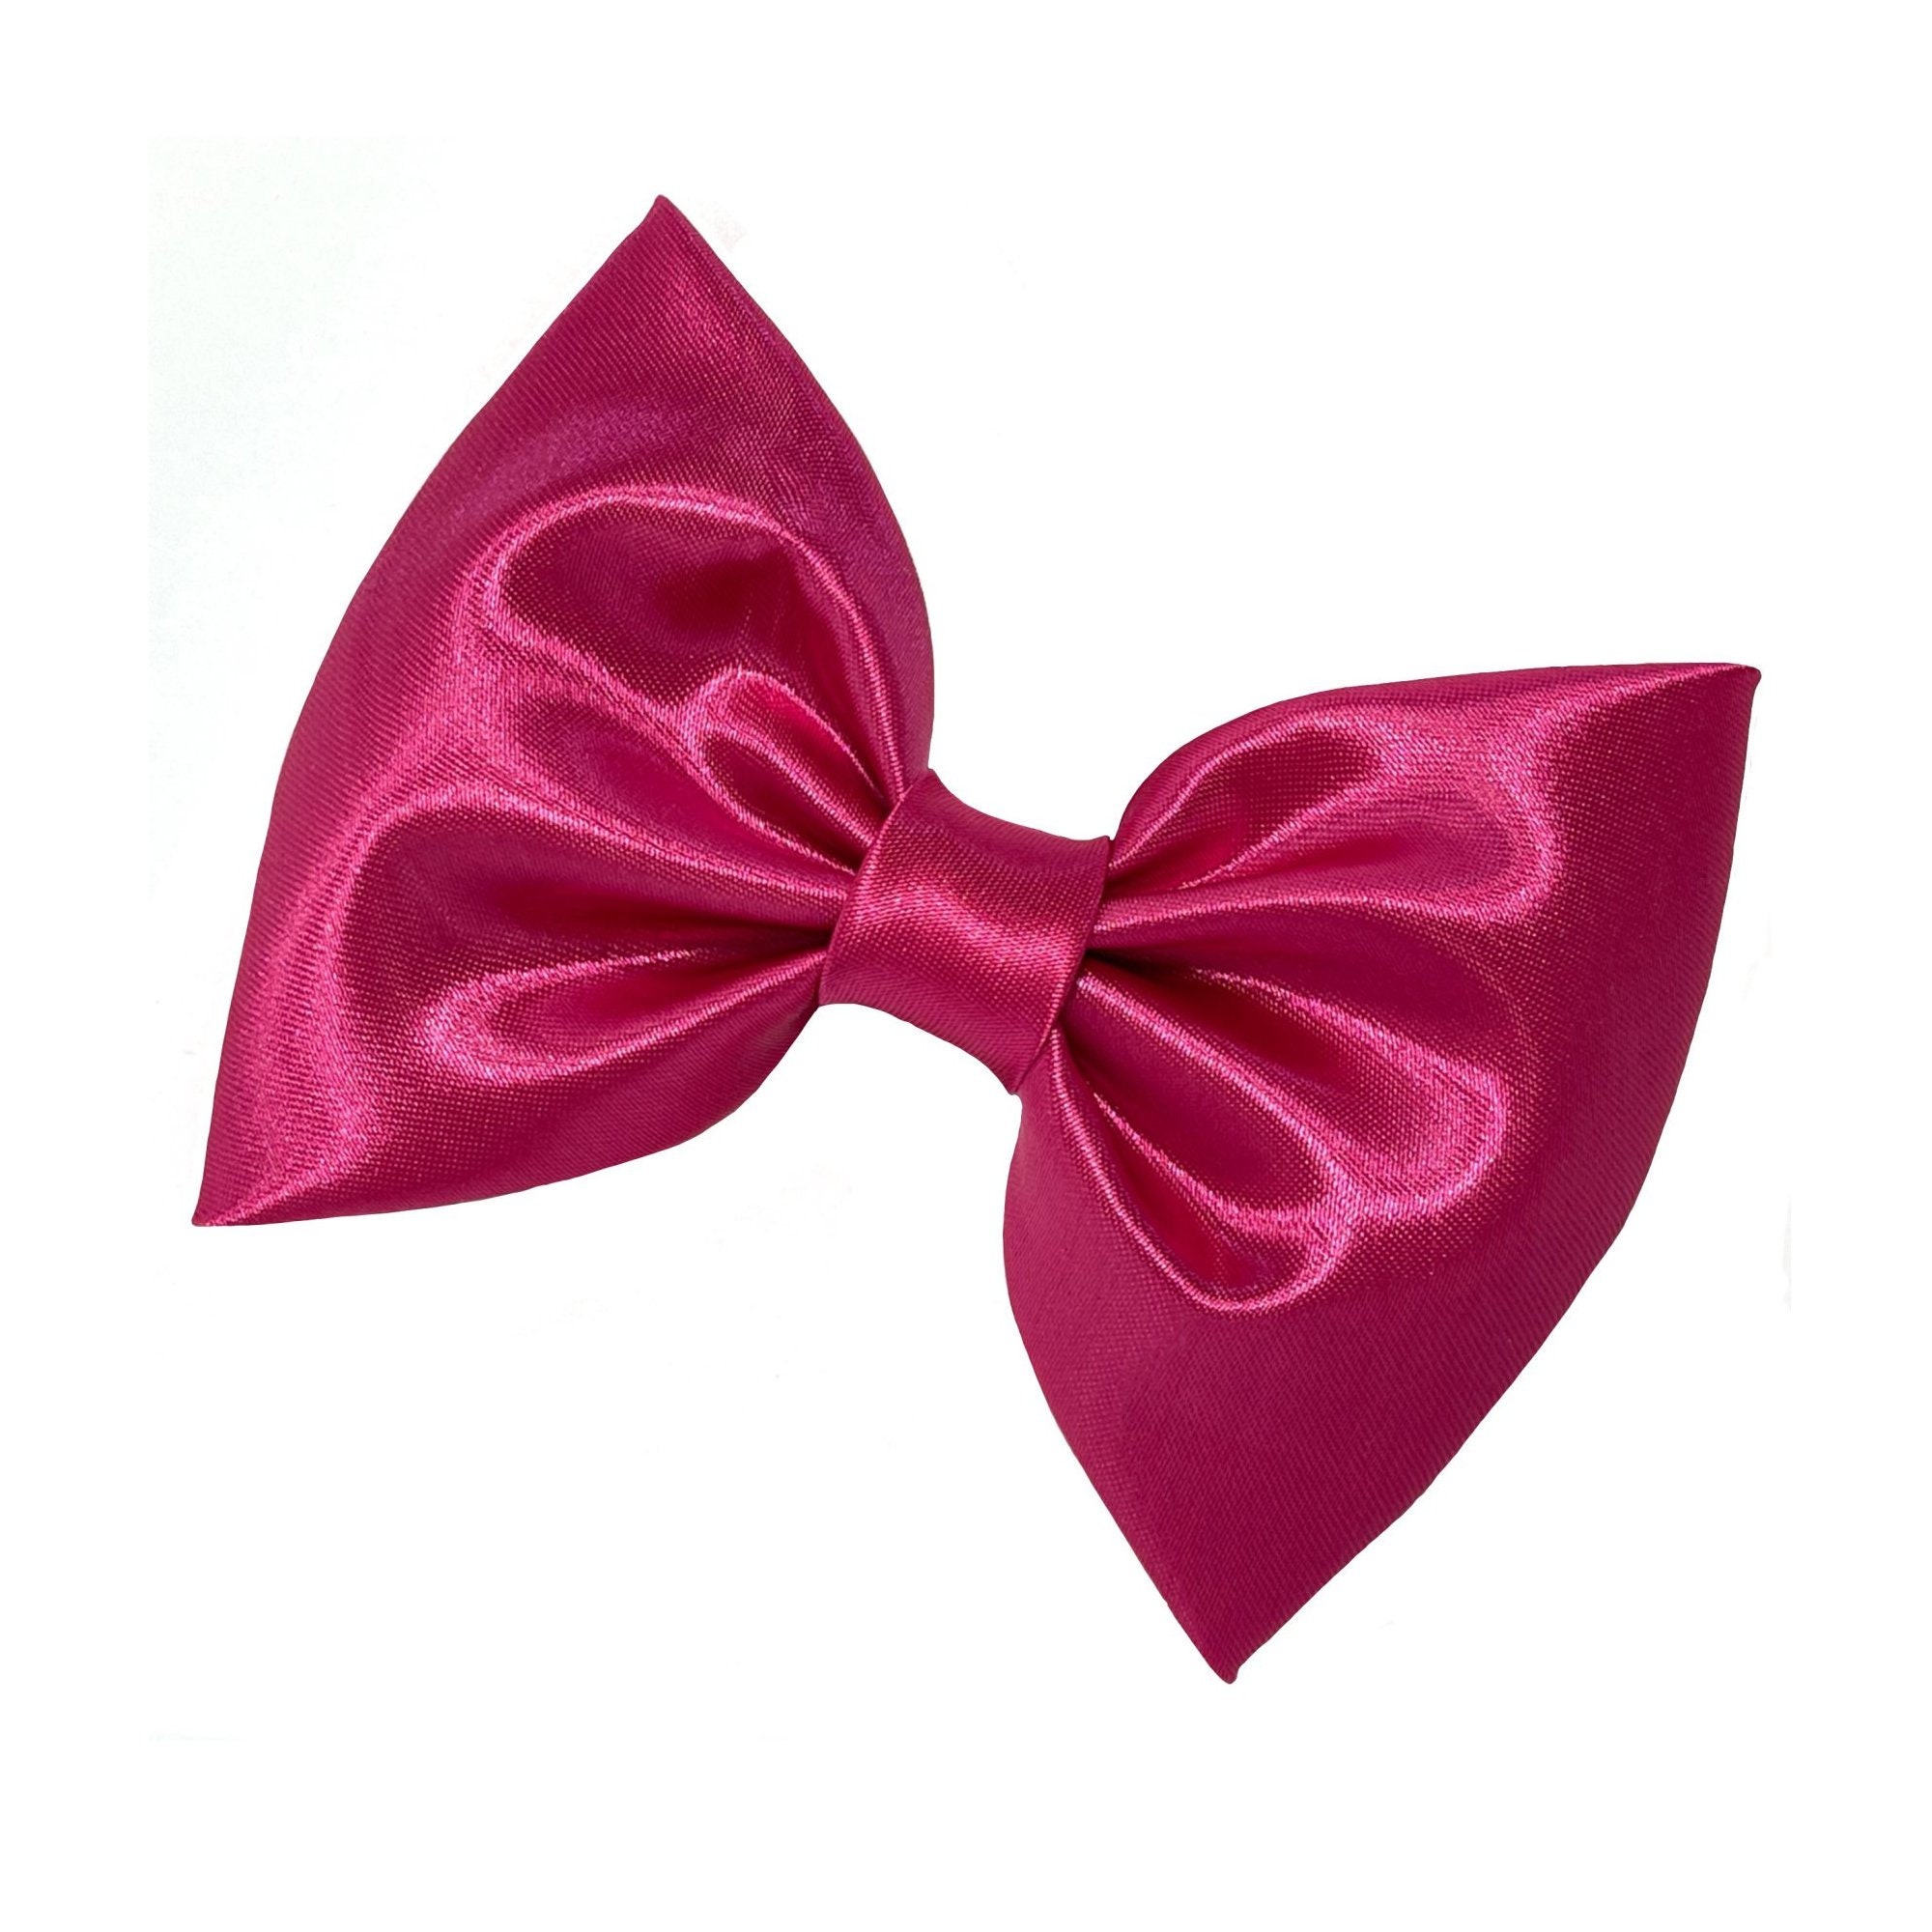 Red Hair Bow, Red Satin Hair Bow, Satin Big Bow, Wedding Pew Bow,red Big  Satin Bow, Handmade Bow, Wedding Bow, Bows for Girls 